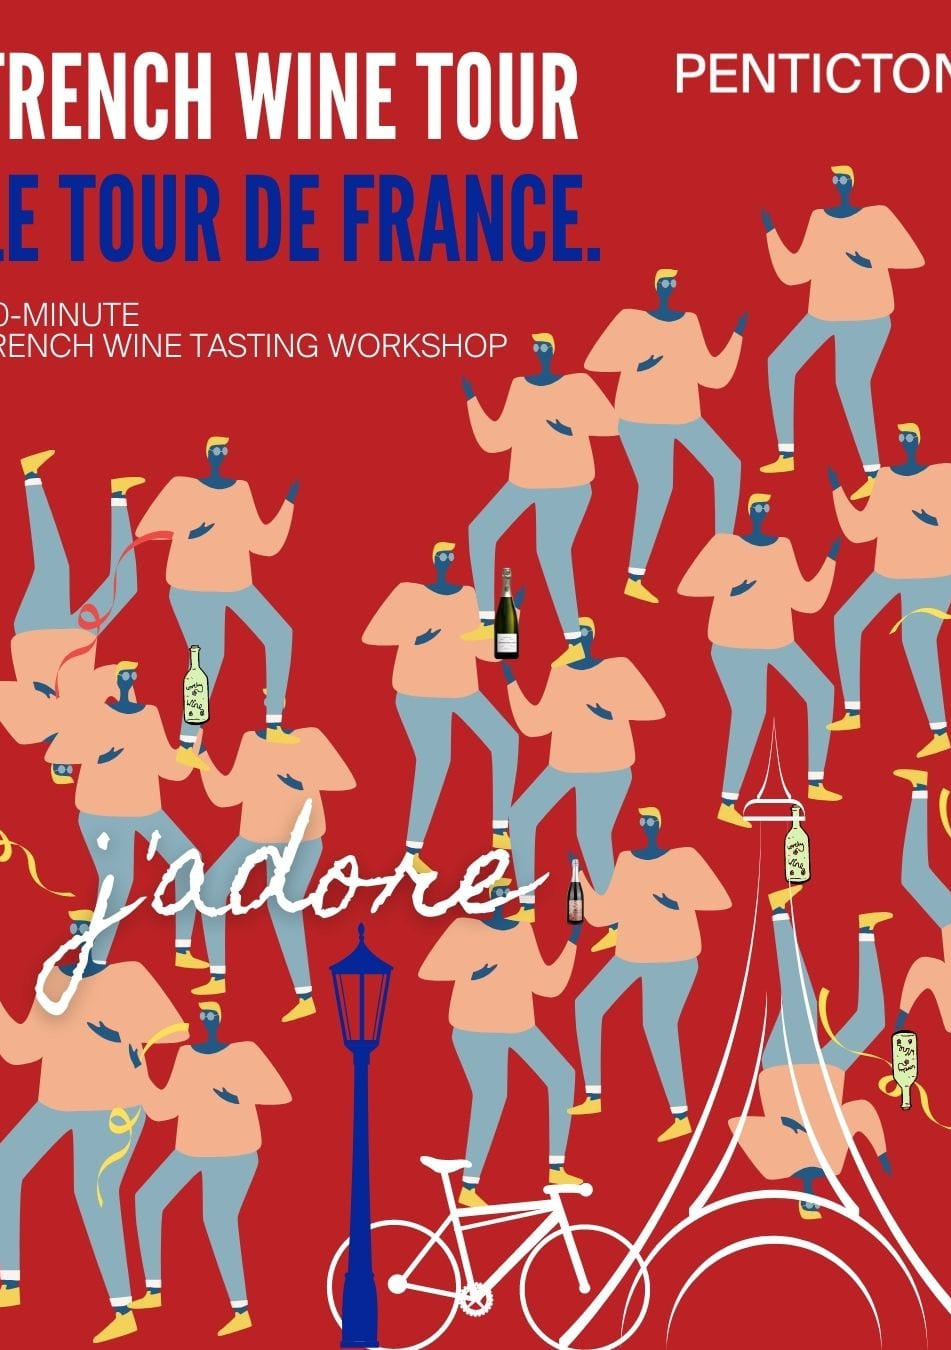 Shop PENTICTON A French Wine Tour 【漫遊法國】法國品酒工作坊 online at PENTICTON artisanal French wine store in Hong Kong. Discover other French wines, promotions, workshops and featured offers at pentictonpacific.com 